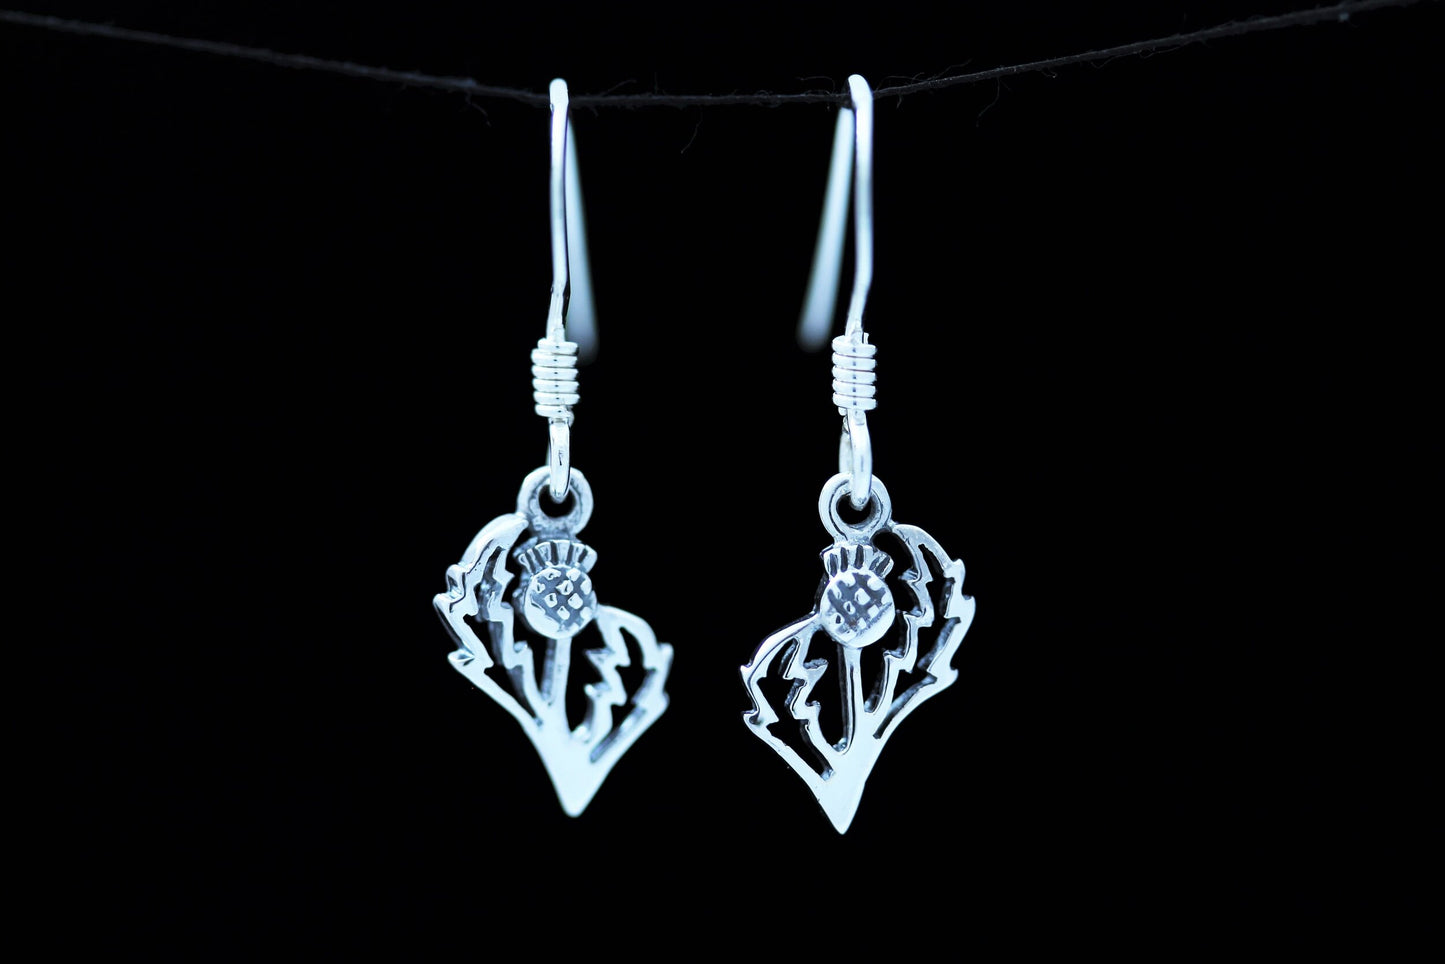 Scottish Thistle Earrings - Contemporary Cut (Small)